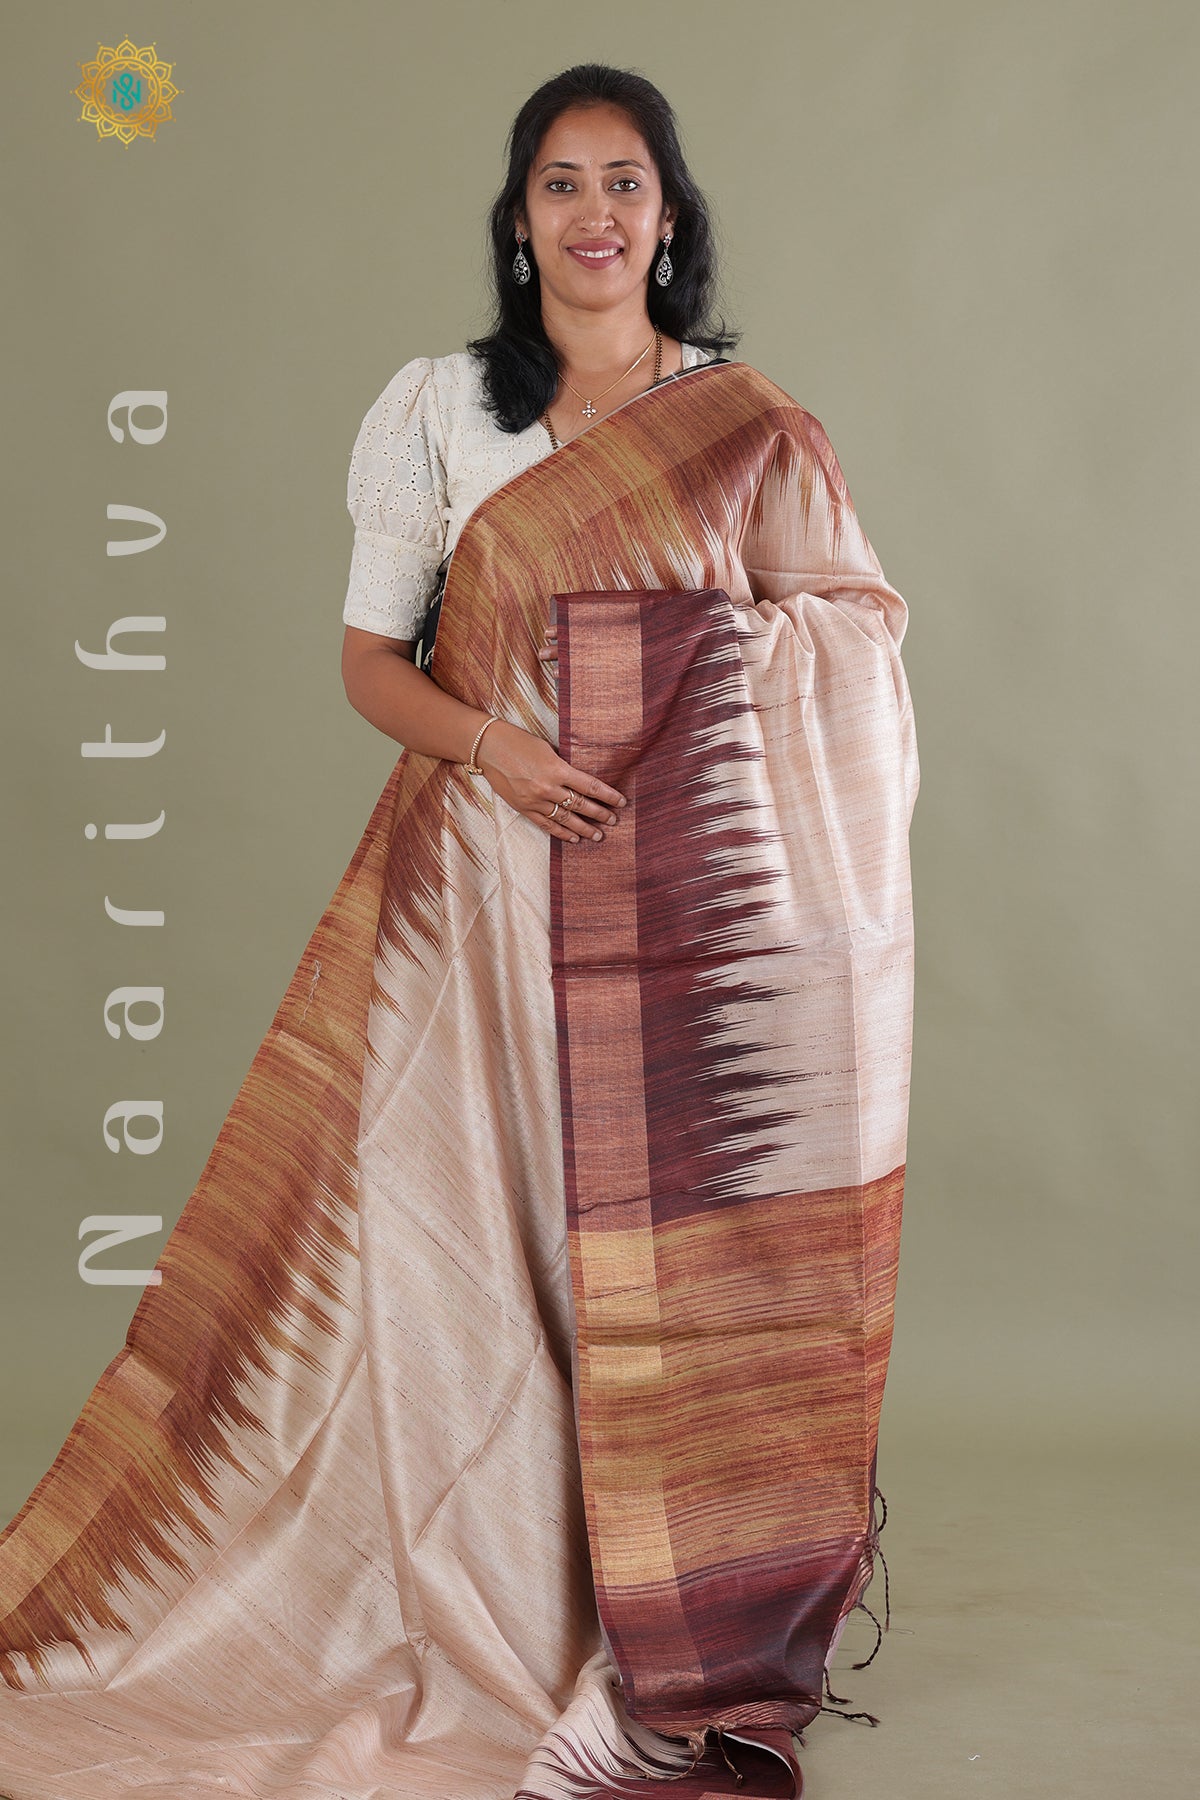 Daily Wear Saree - Shop For The Most Beautiful Collection of Daily Saree  Online at Myntra